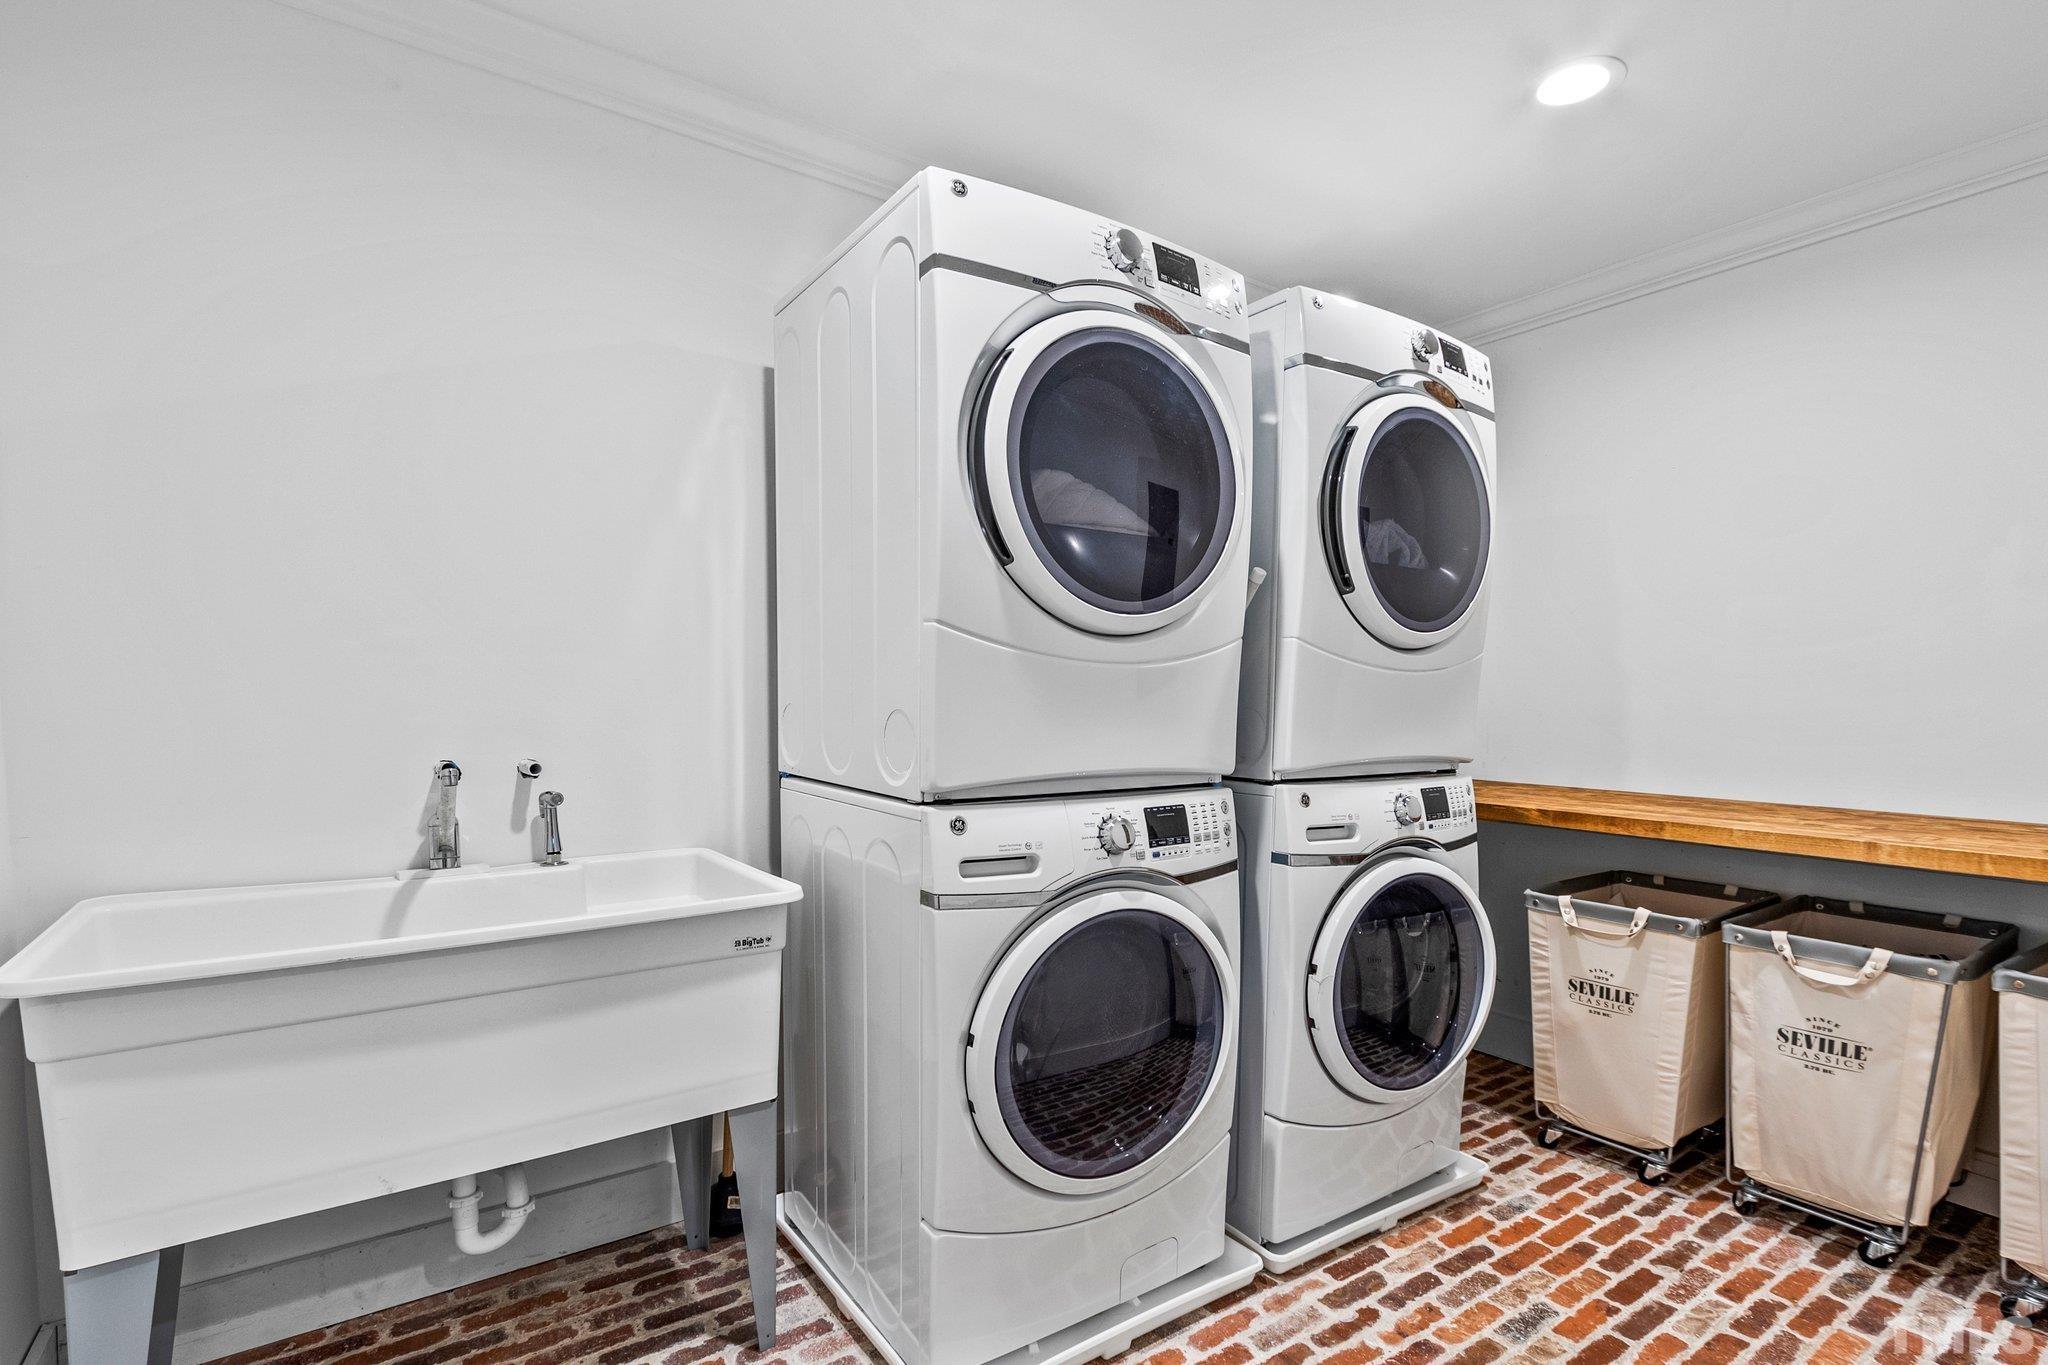 Ample space provided in laundry room, enough to allow for multiple Washer/Dryer sets, a utility sink and folding table.